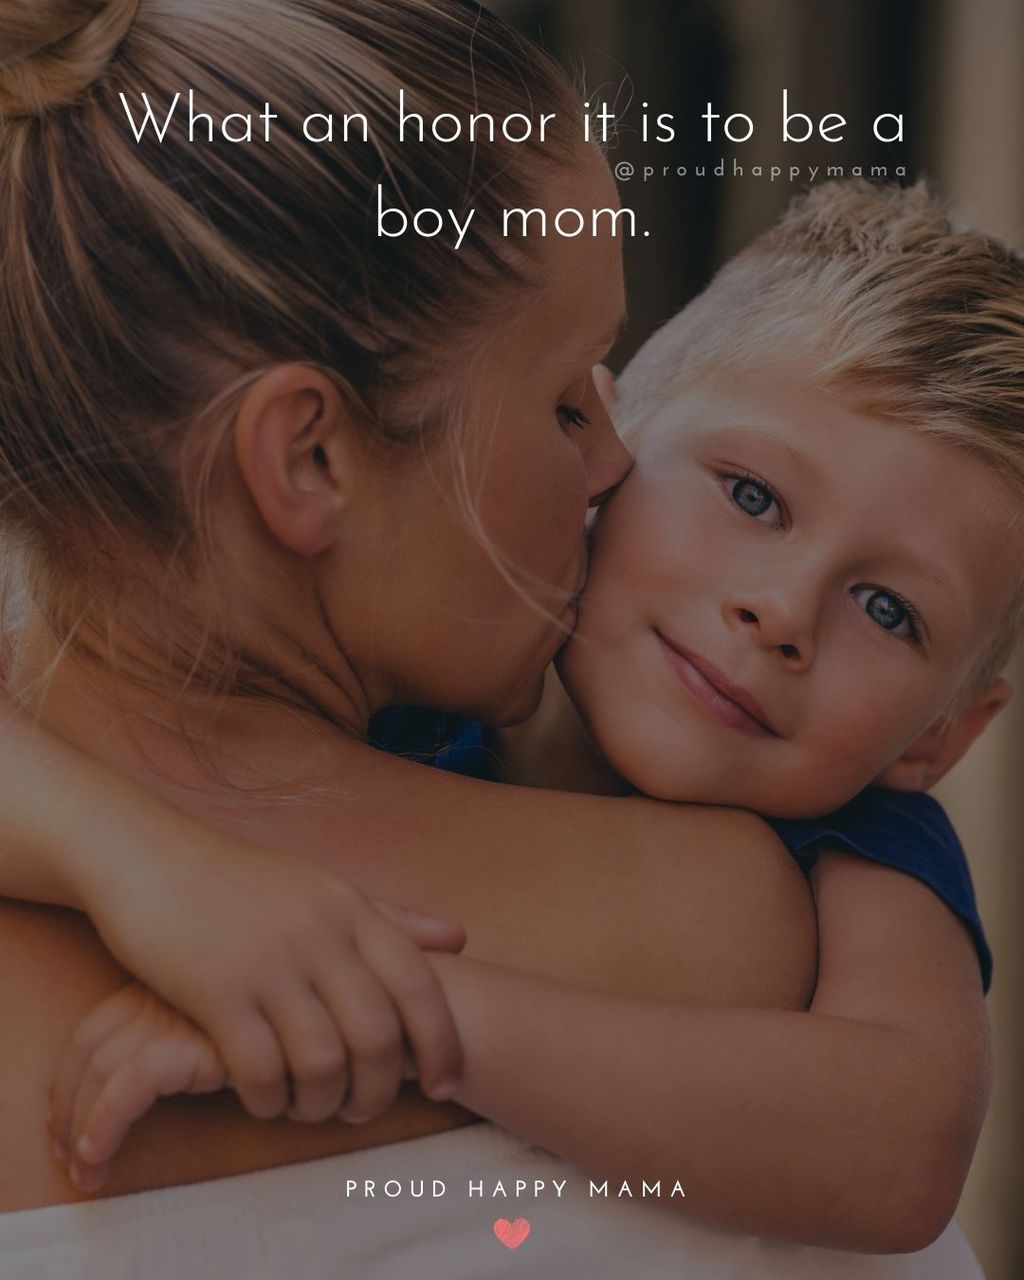 Boy Mom Quotes - What an honor it is to be a boy mom.